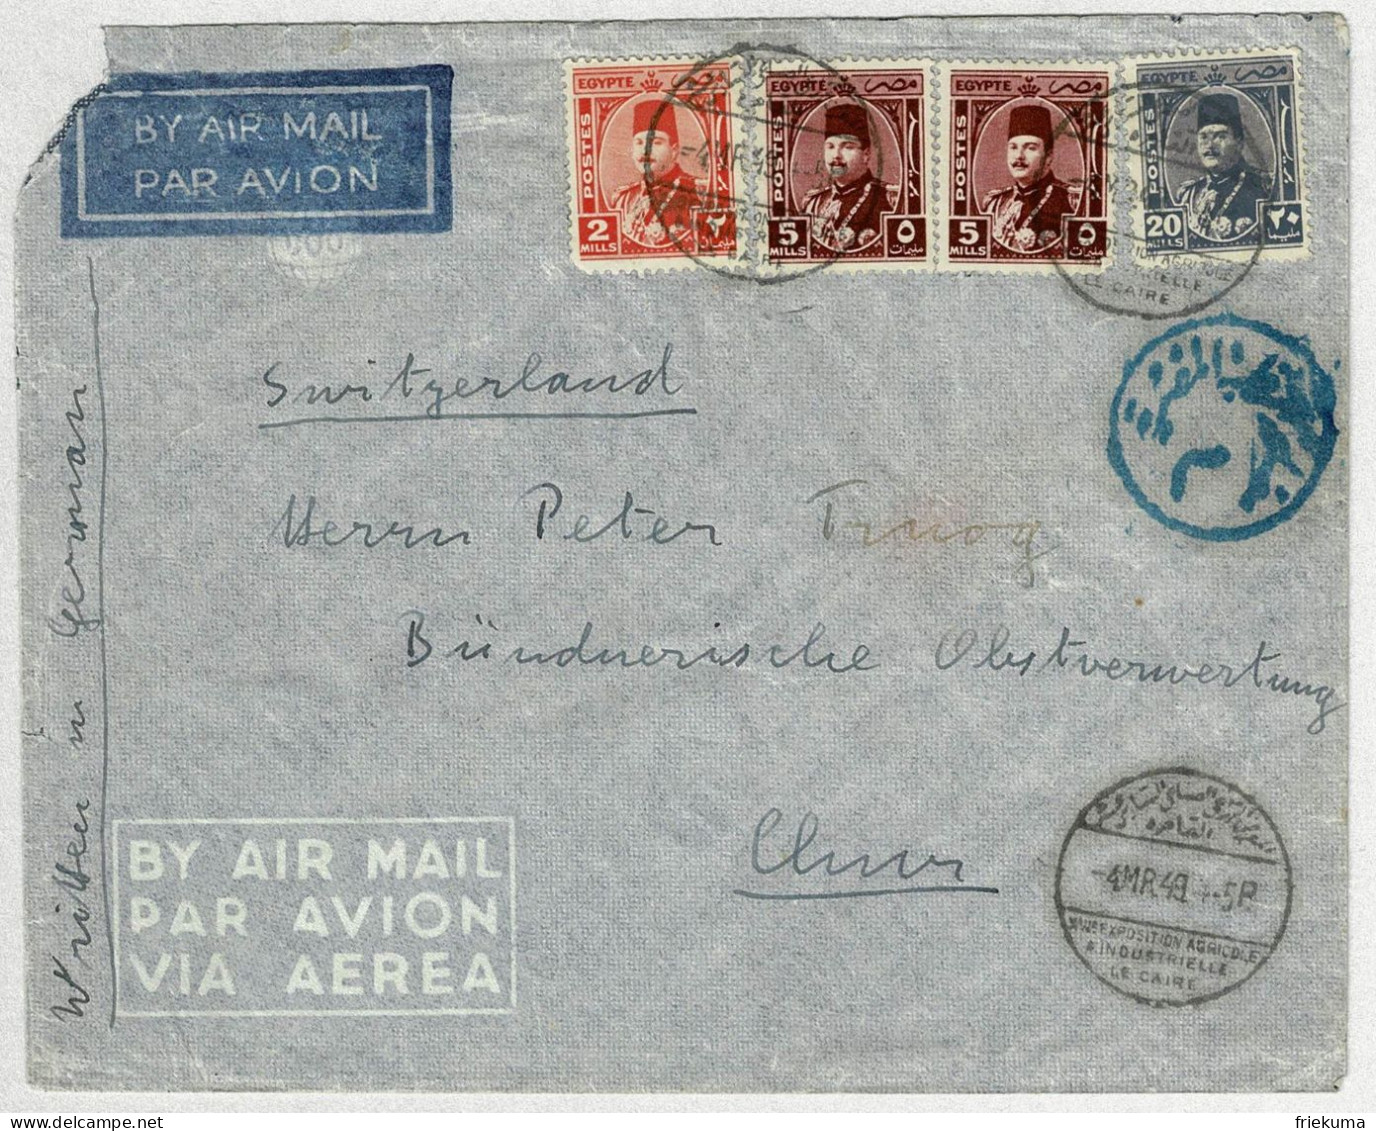 Aegypten / Postes Egypte 1949, Luftpostbrief / Air Mail Exposition Agricole & Industrielle Caire - Chur (Schweiz) - Covers & Documents